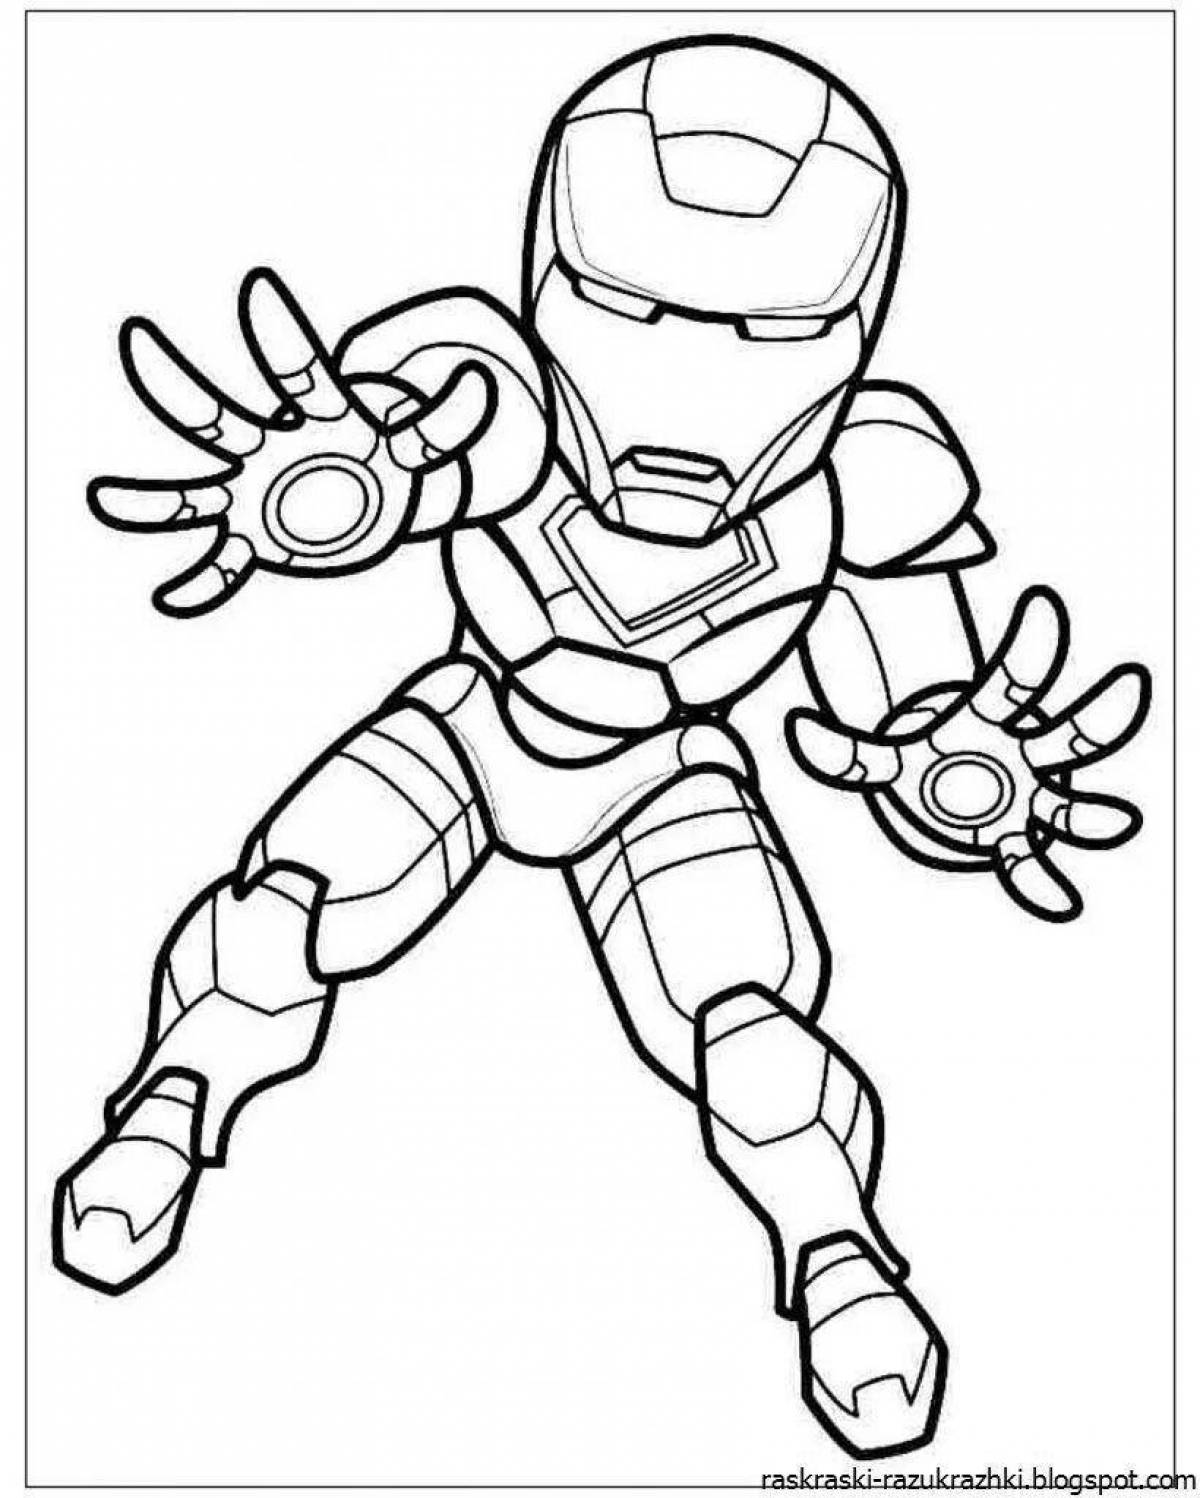 Stormy iron coloring page